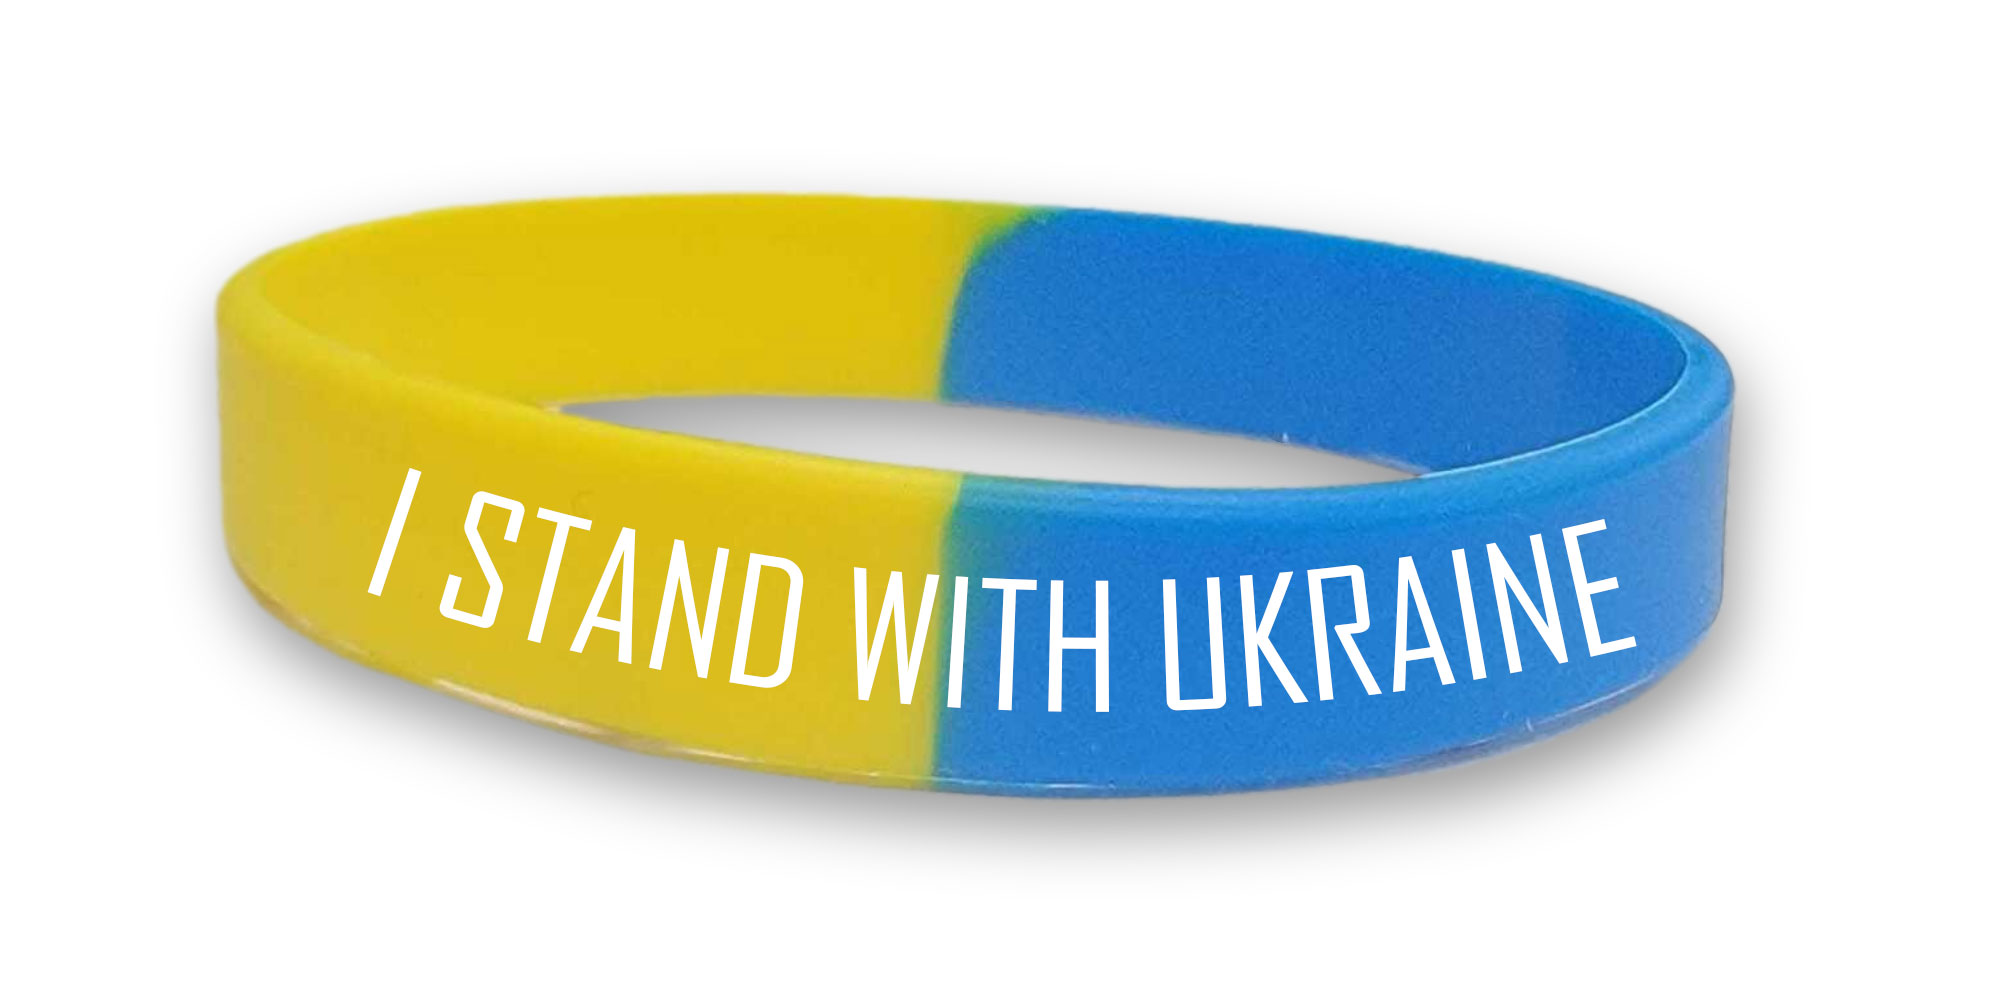 FREE "I Stand With Ukraine" Wristbands. Limit (1) per household. USA Addresses Only. While Supplies Last.